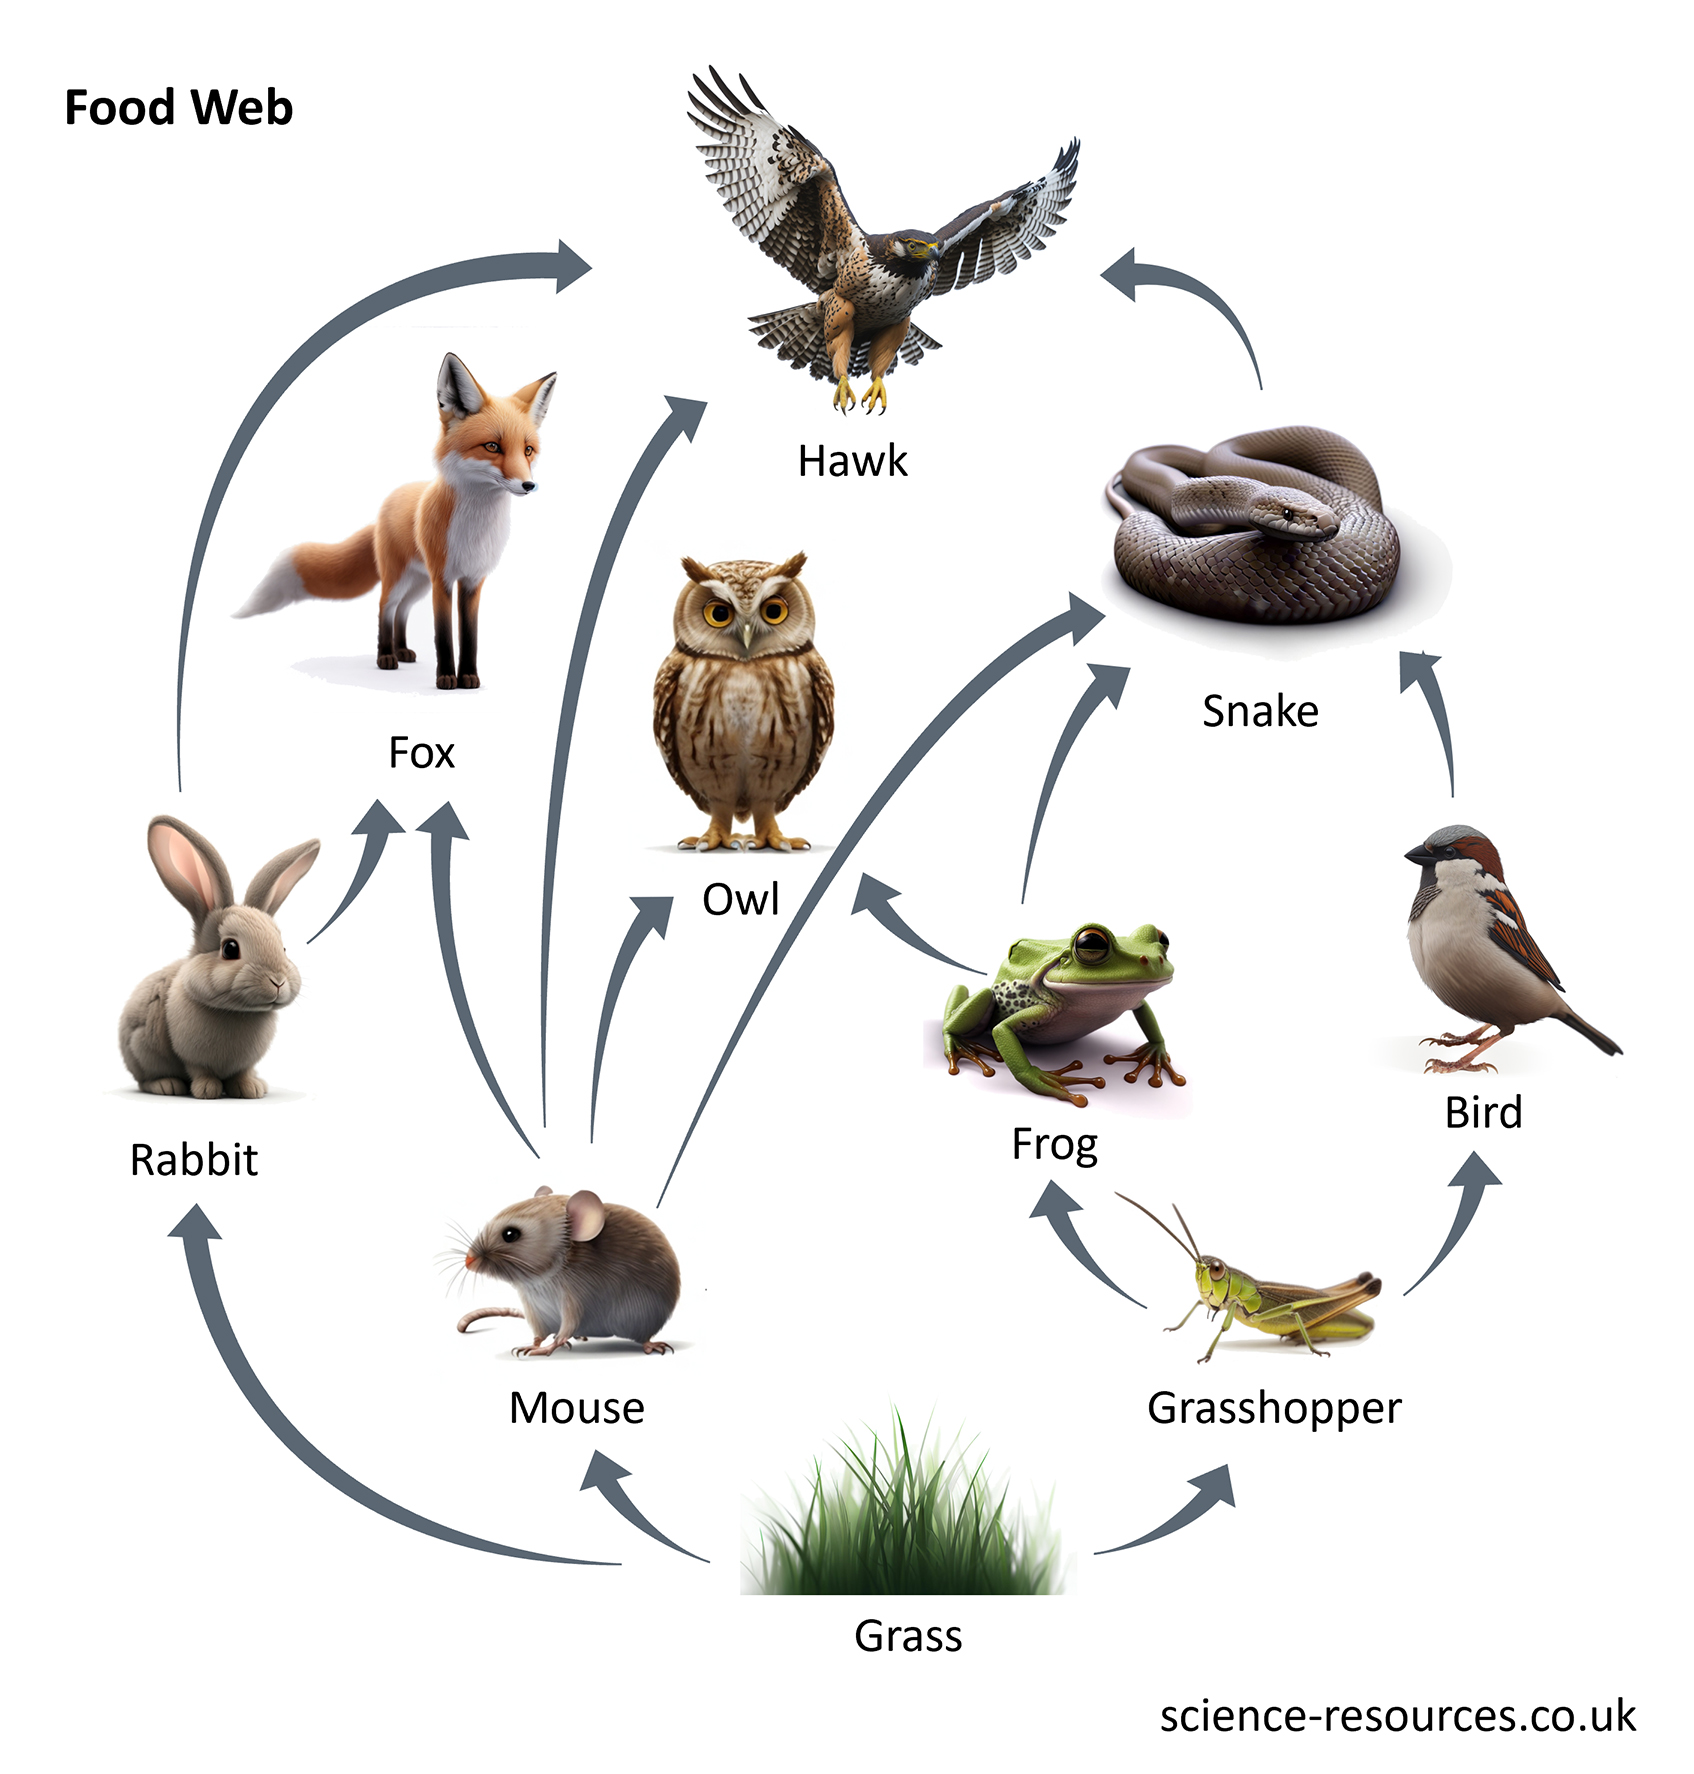 This image is a graphical representation of a food web, showcasing various animals and their prey. It illustrates the relationships between different species in an ecosystem.